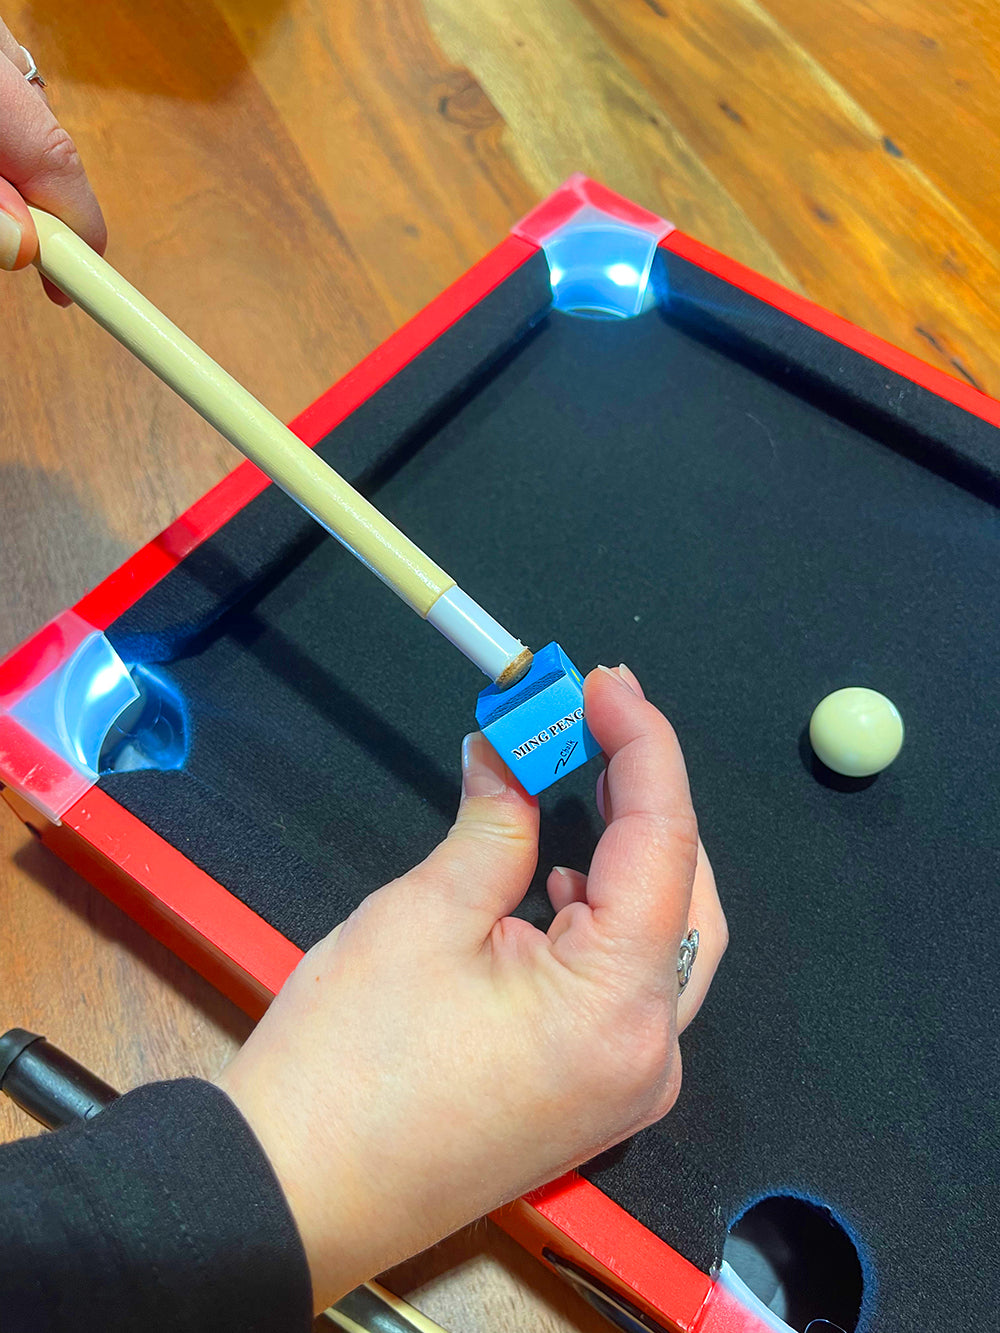 Light up Table Top Billiards Game